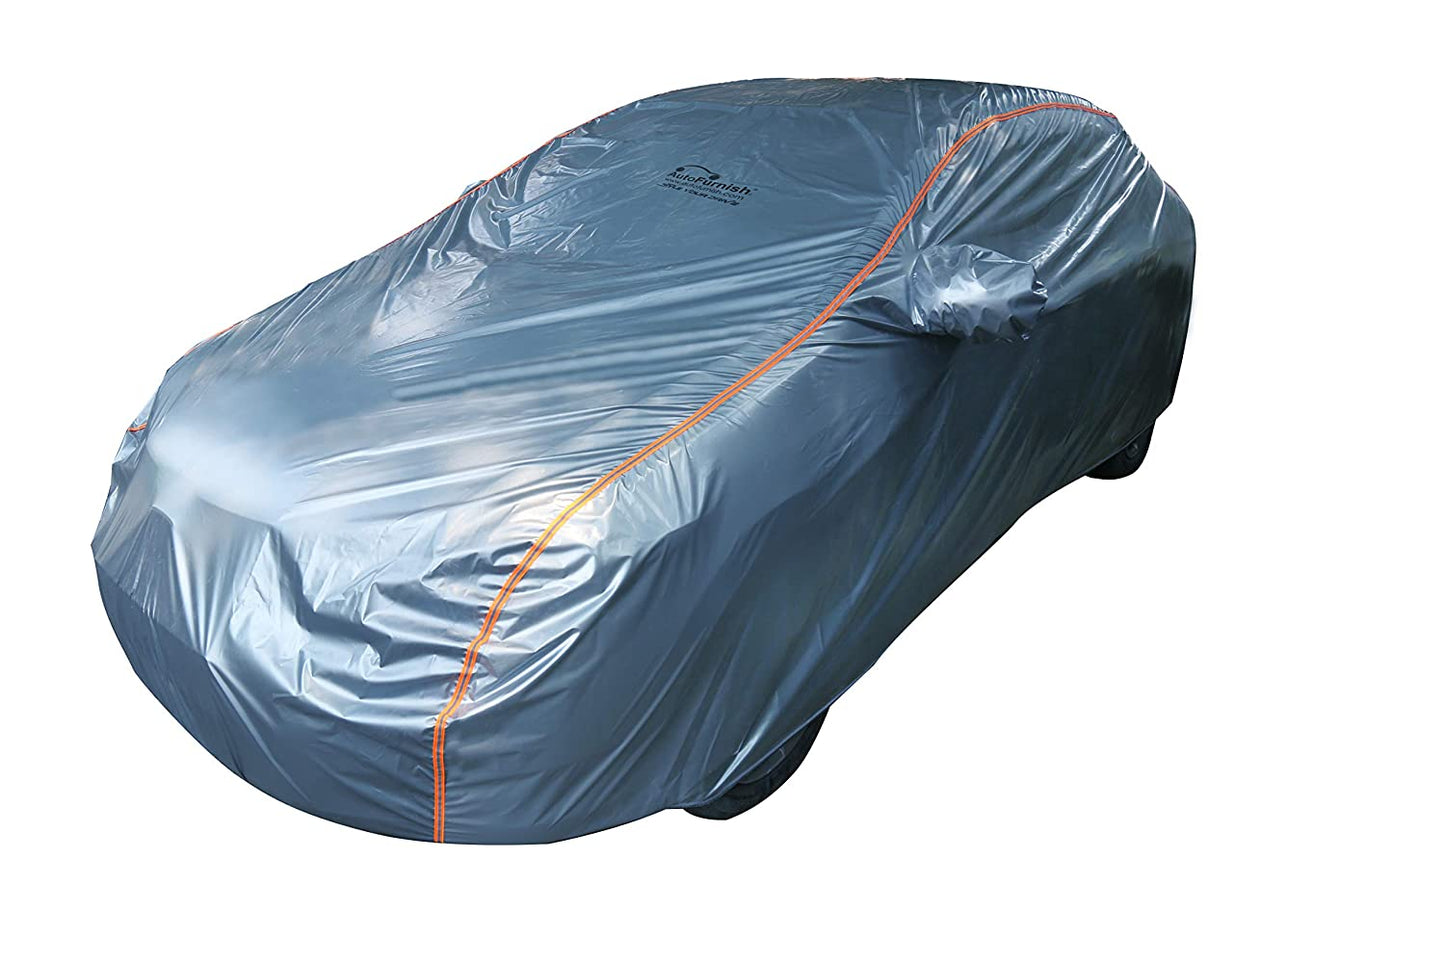 Mahindra Alturas G4 2019 Waterproof Car Cover, All Weather Proof, Premium & Long Lasting Fabric with Side Mirror Pocket (ACHO Series)